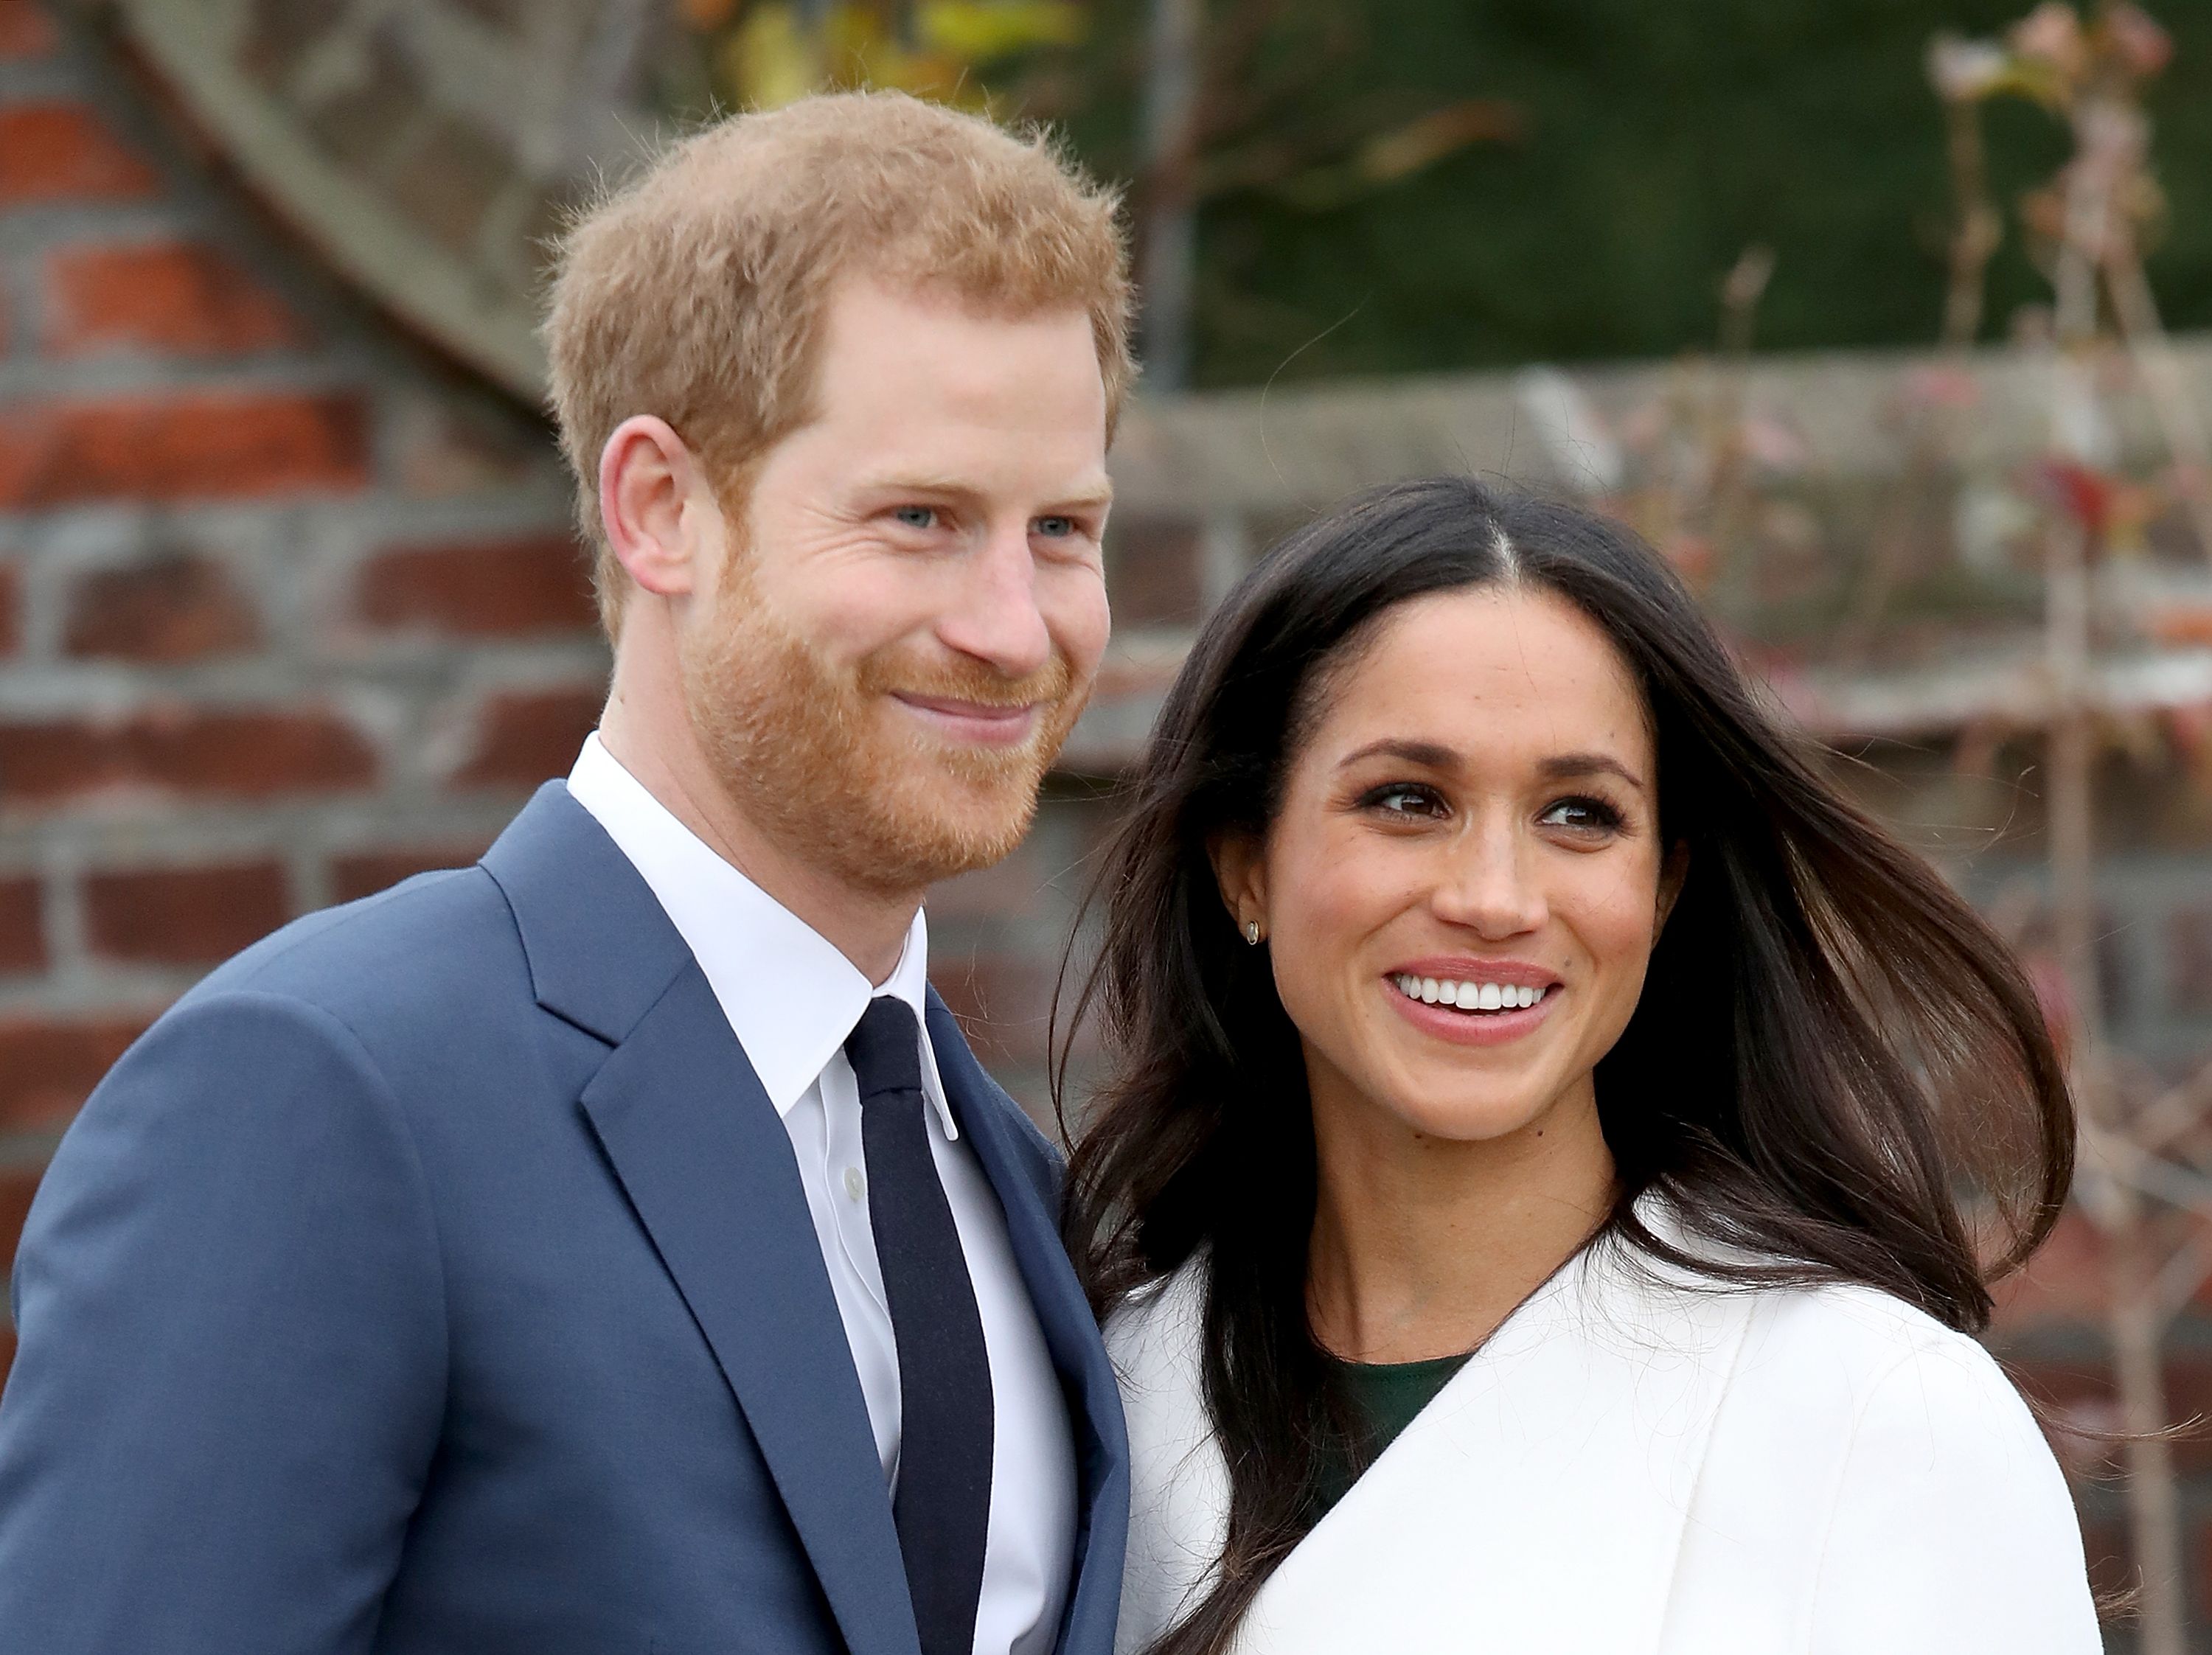 Prince Harry and Meghan Markle Slammed for Stiffing Charity of $110,000, Labeled as "Shameless Posers" 